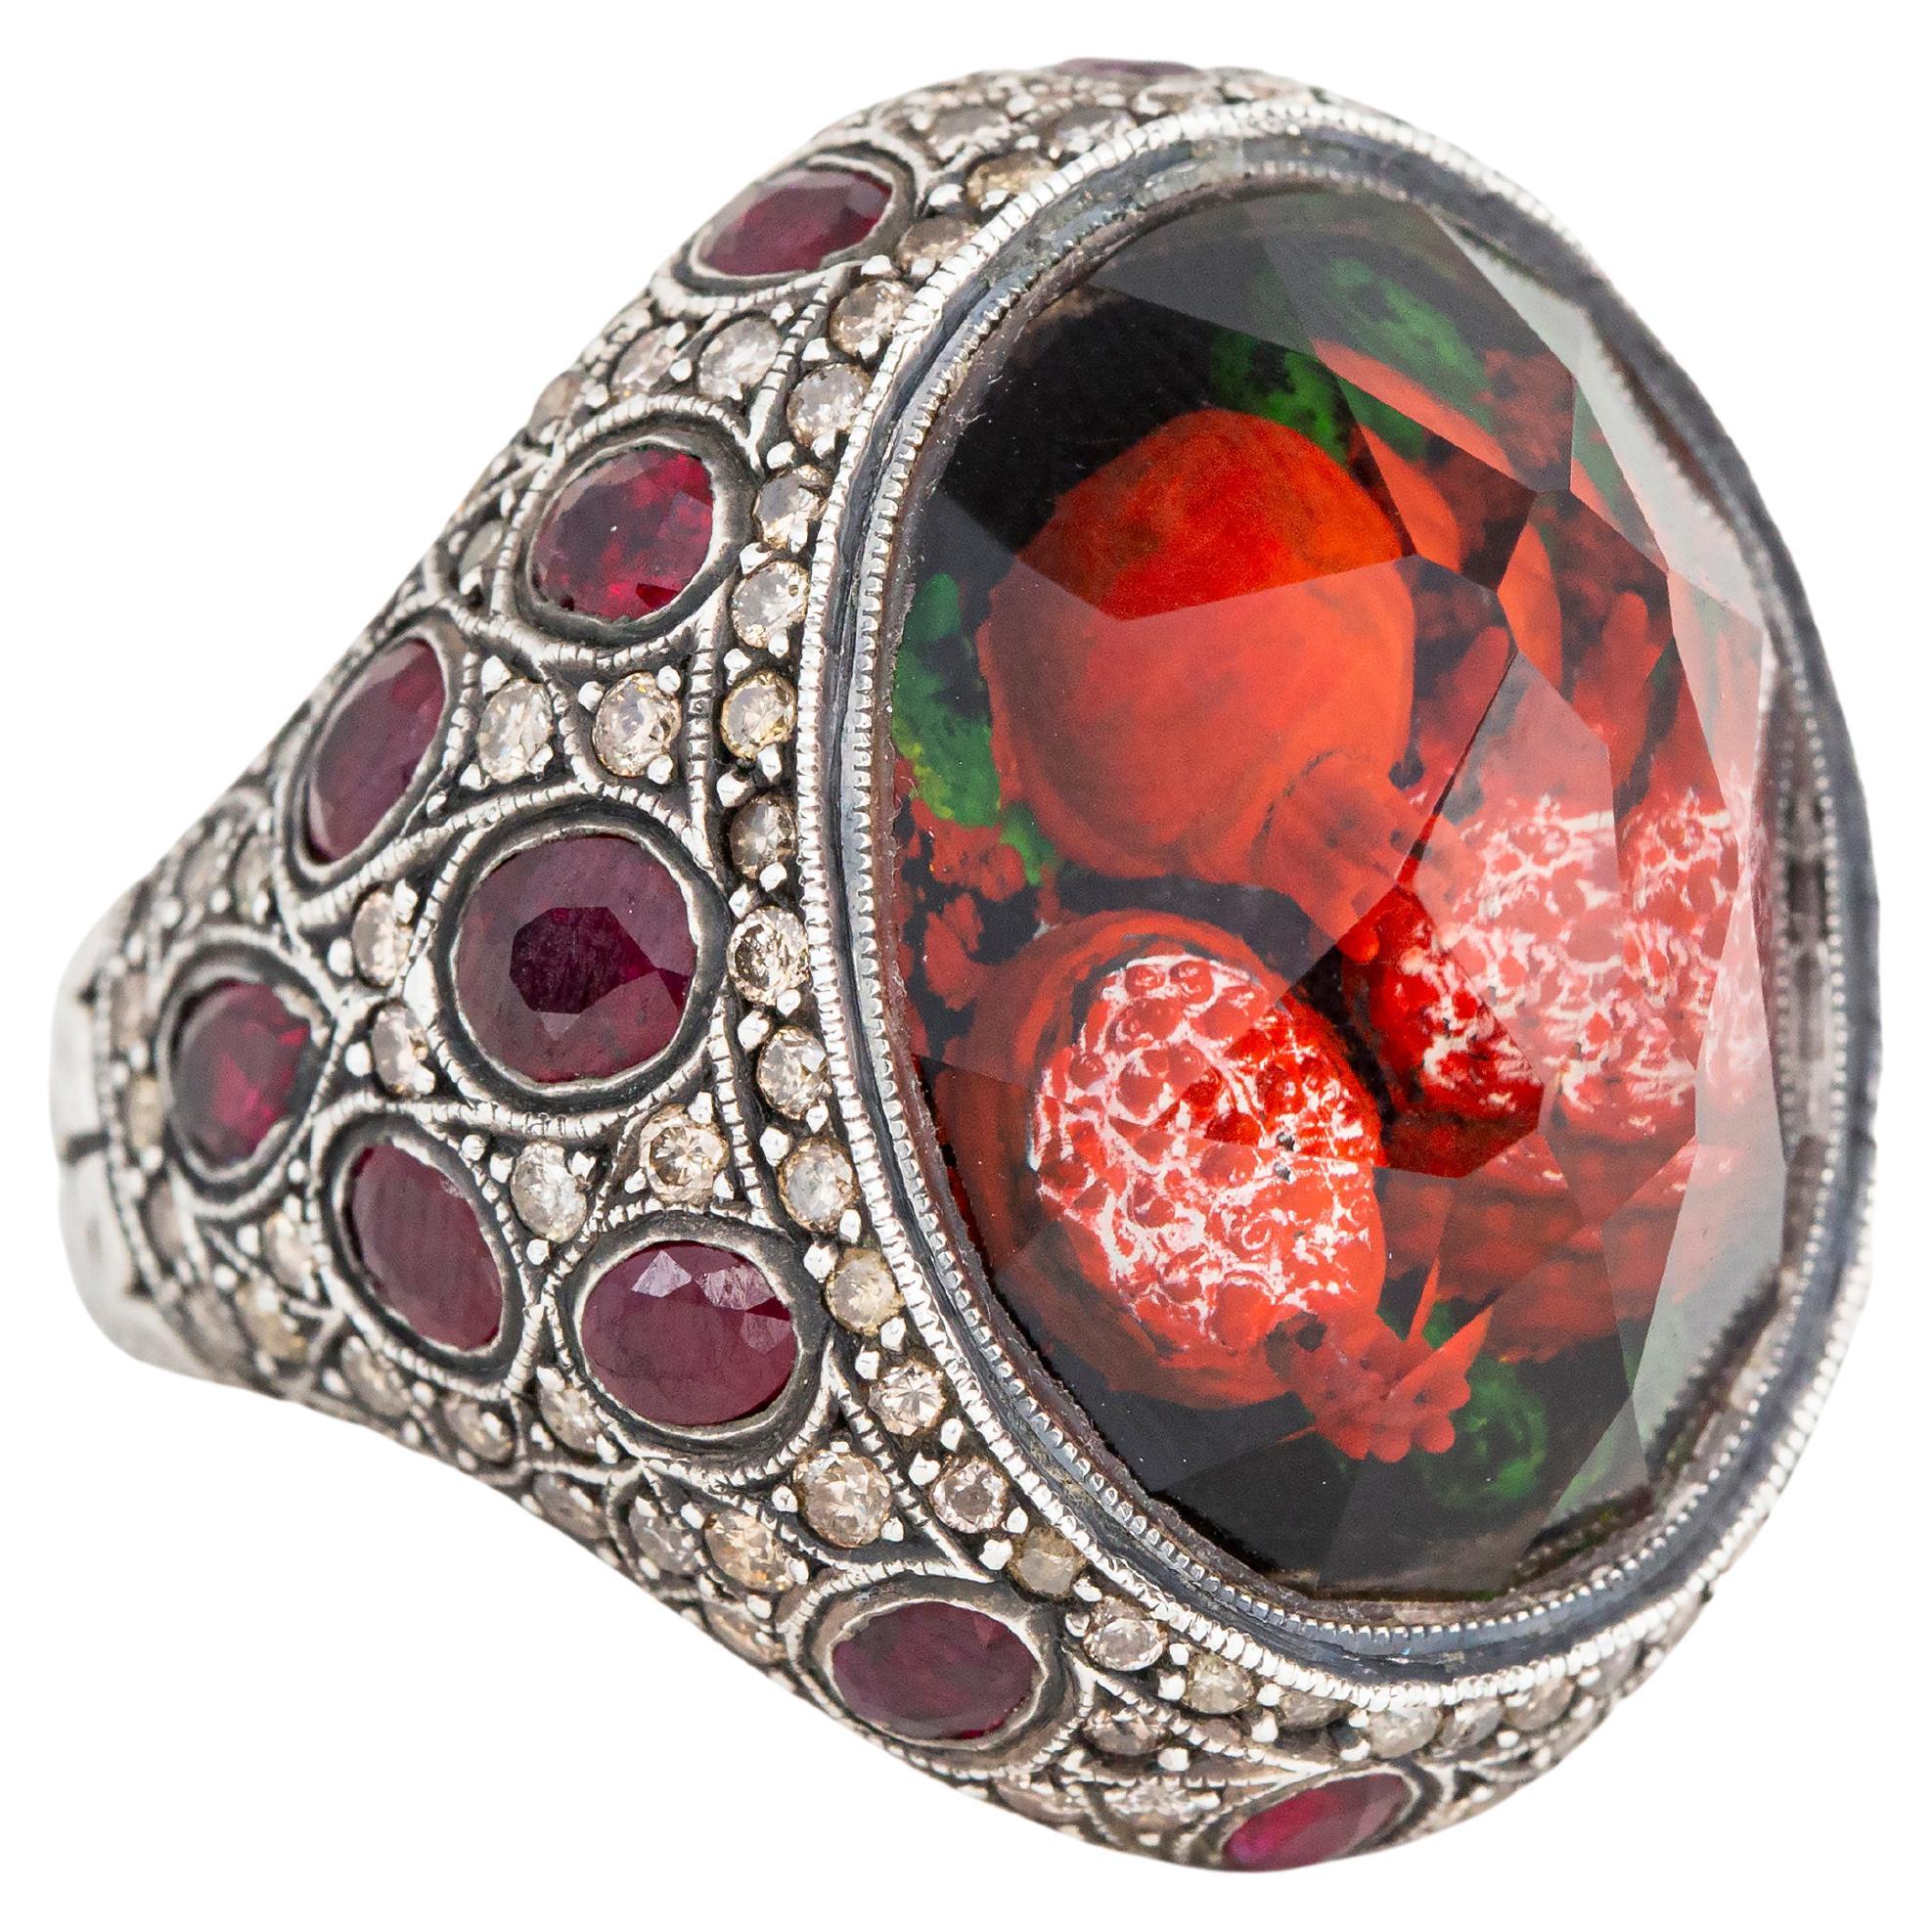 24k Gold and 925K Silver Carved Pomegranate Ring with 1.20 Ct Diamond